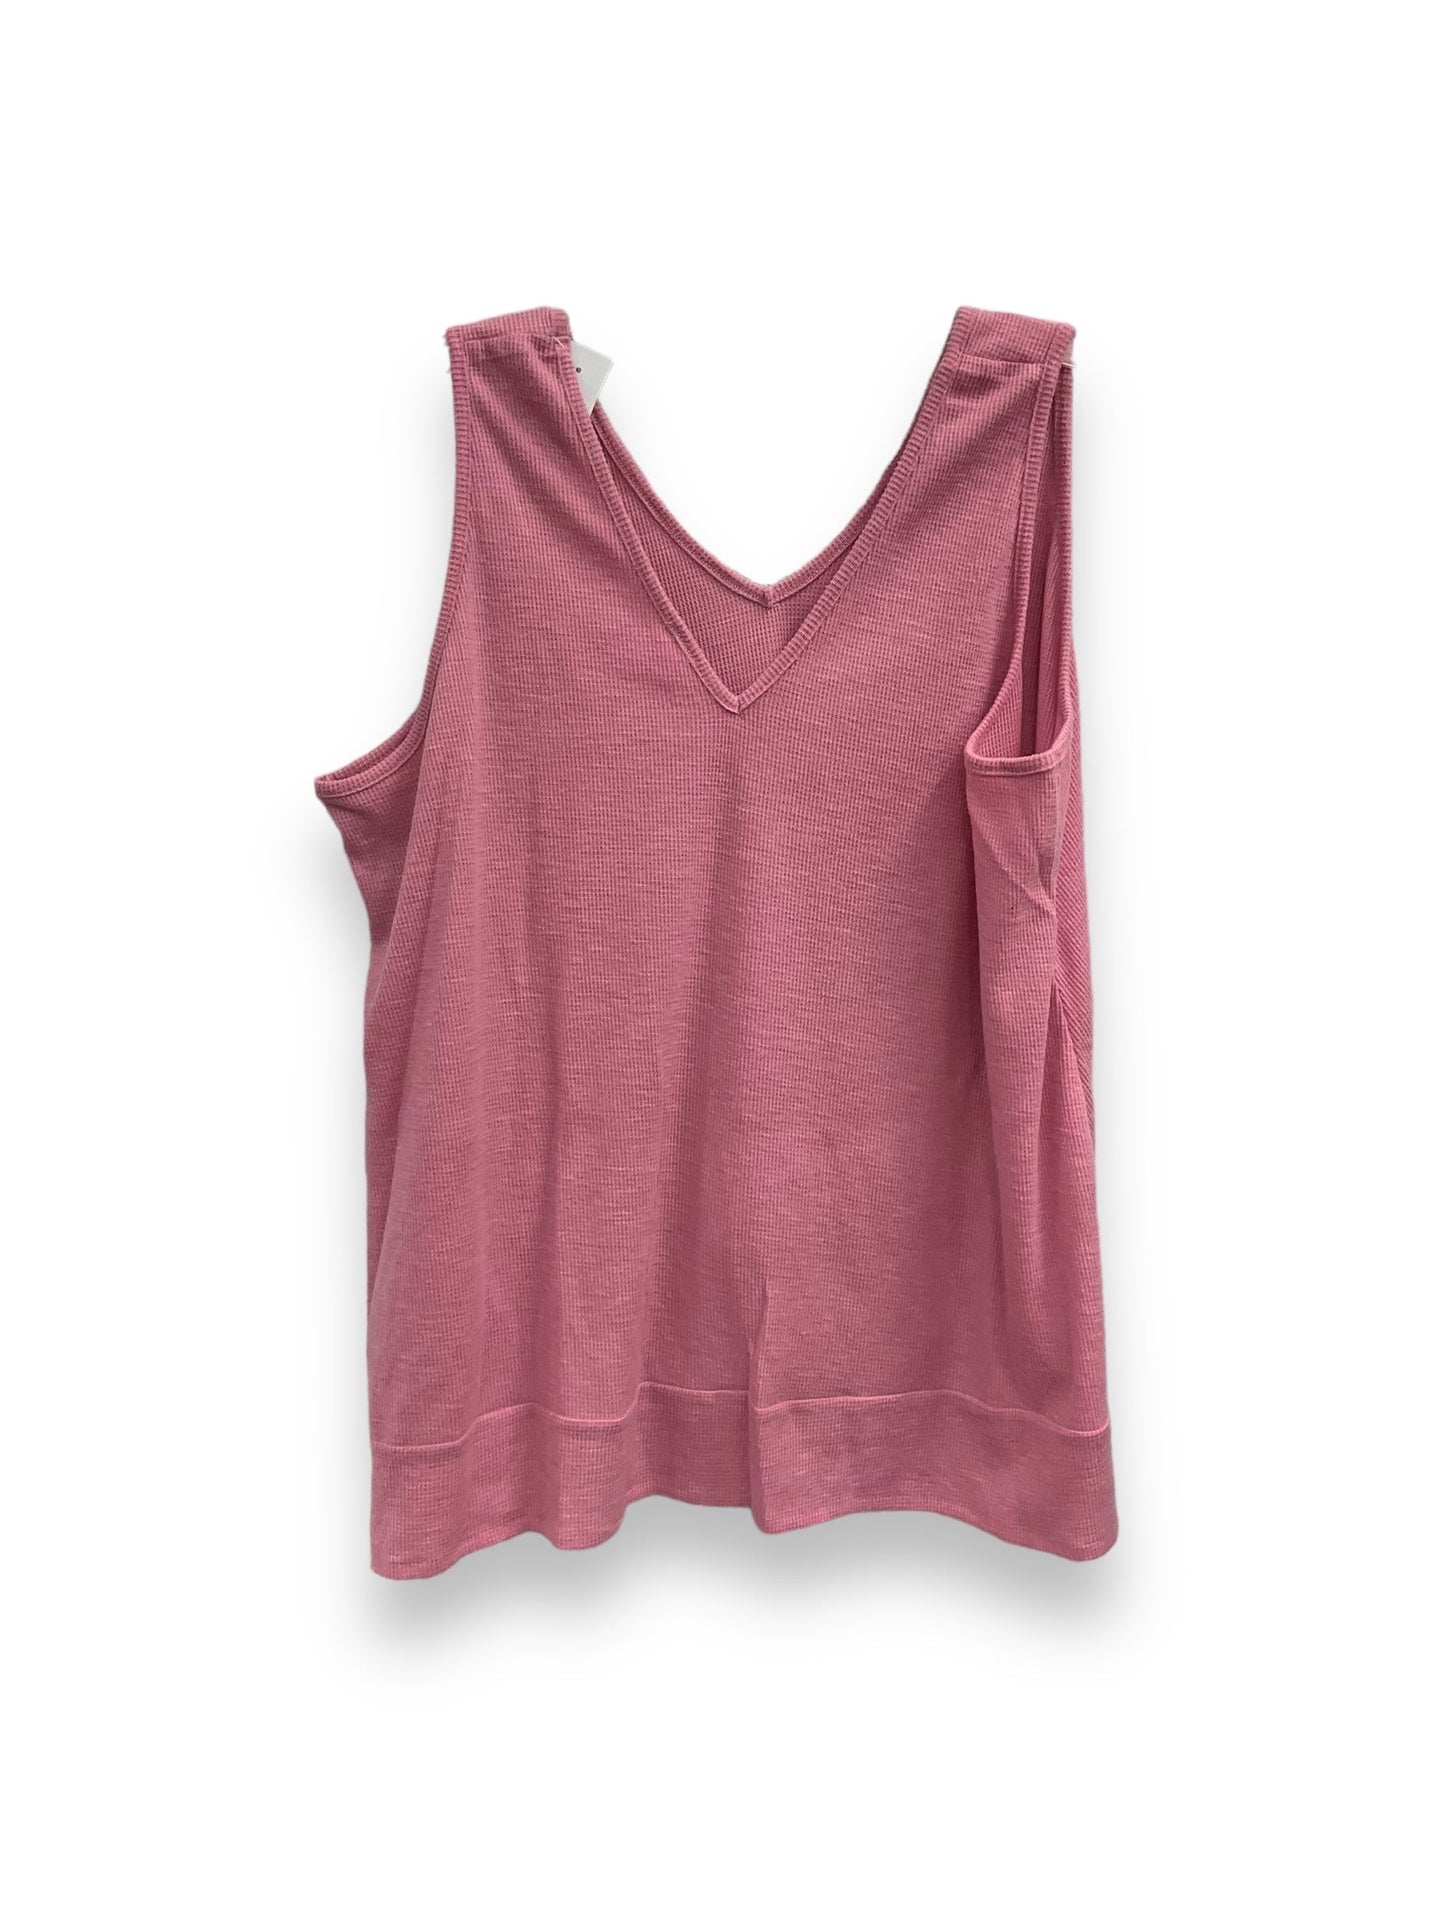 Top Sleeveless Basic By Livi Active  Size: 3x